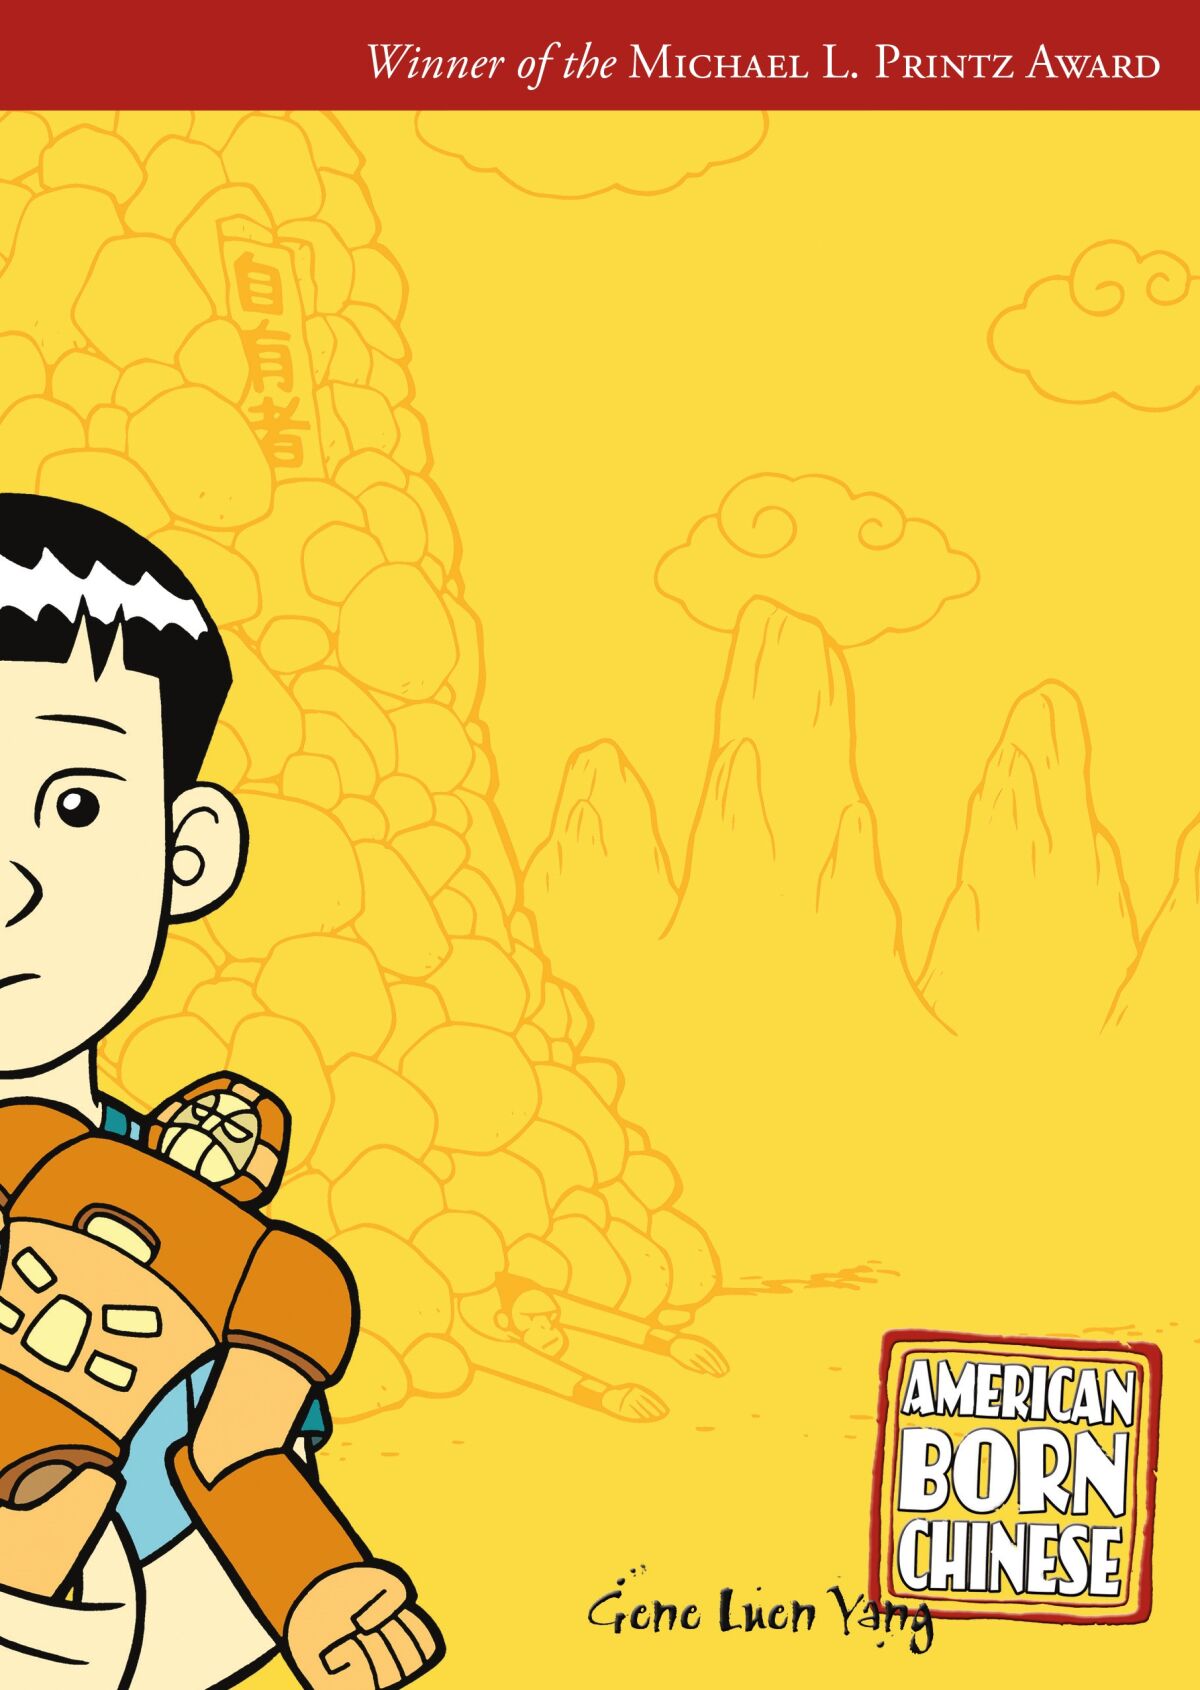 The cover of "American Born Chinese" by Gene Luen Yang